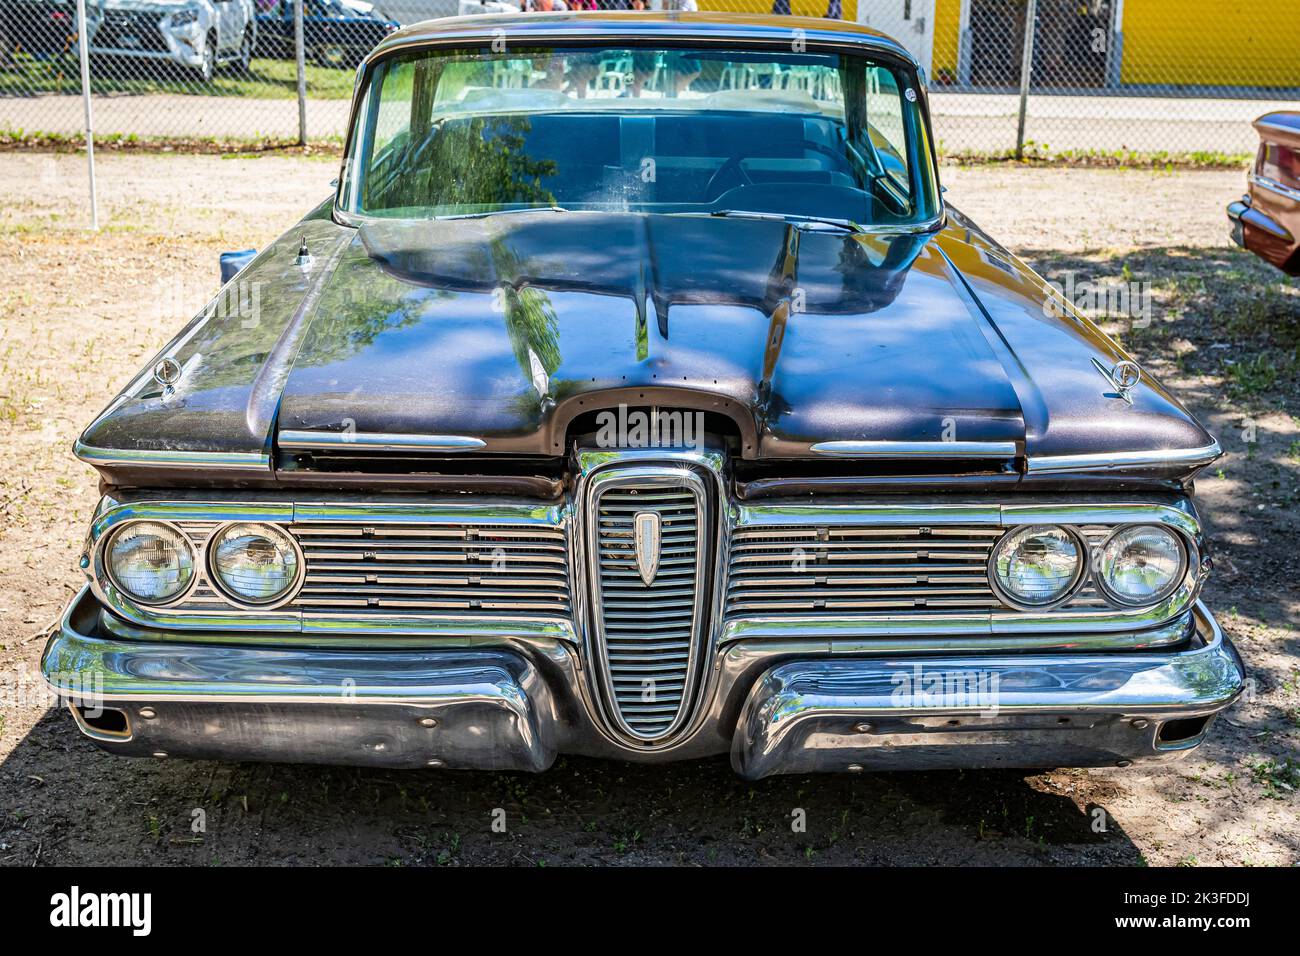 Falcon Heights, MN - June 18, 2022: High perspective front view of a 1959 Edsel Ranger 2 Door Hardtop at a local car show. Stock Photo